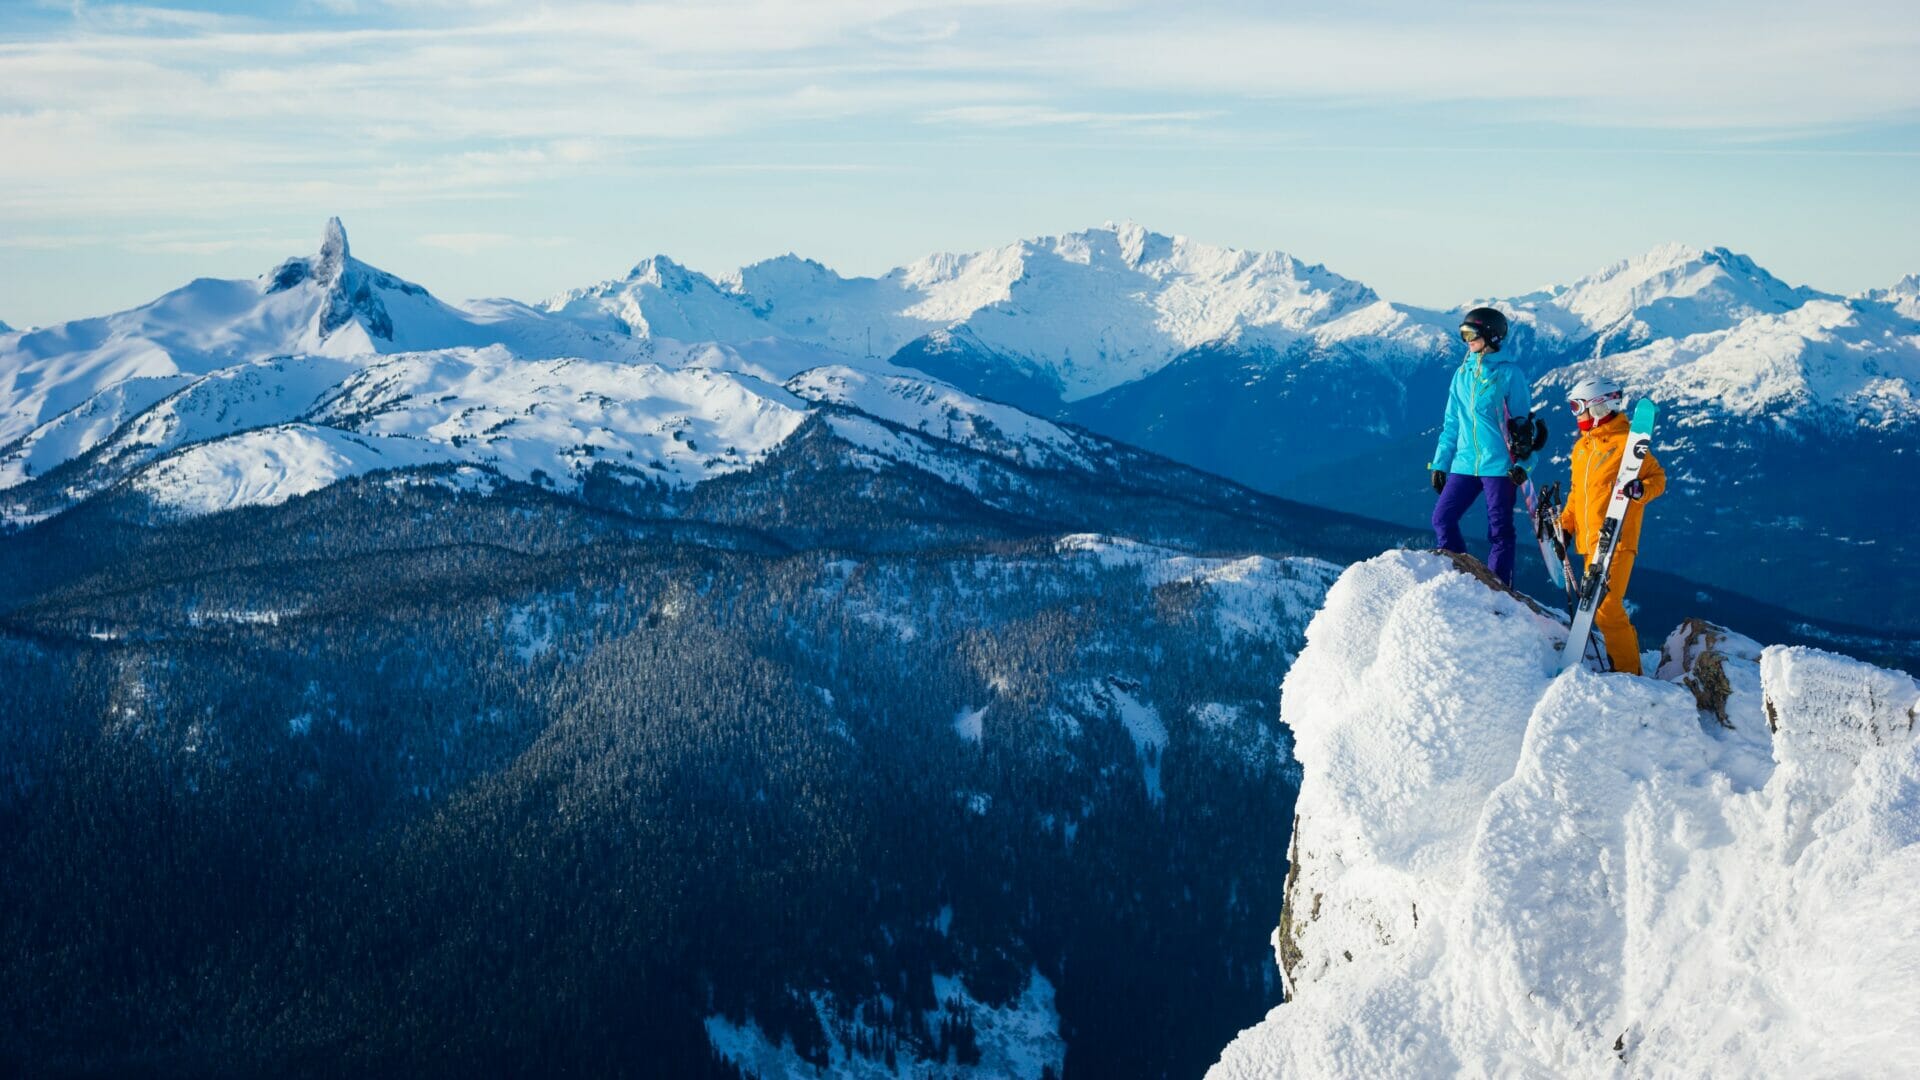 Female skiers and rider checking out the stunning alpine views from Whistler peak